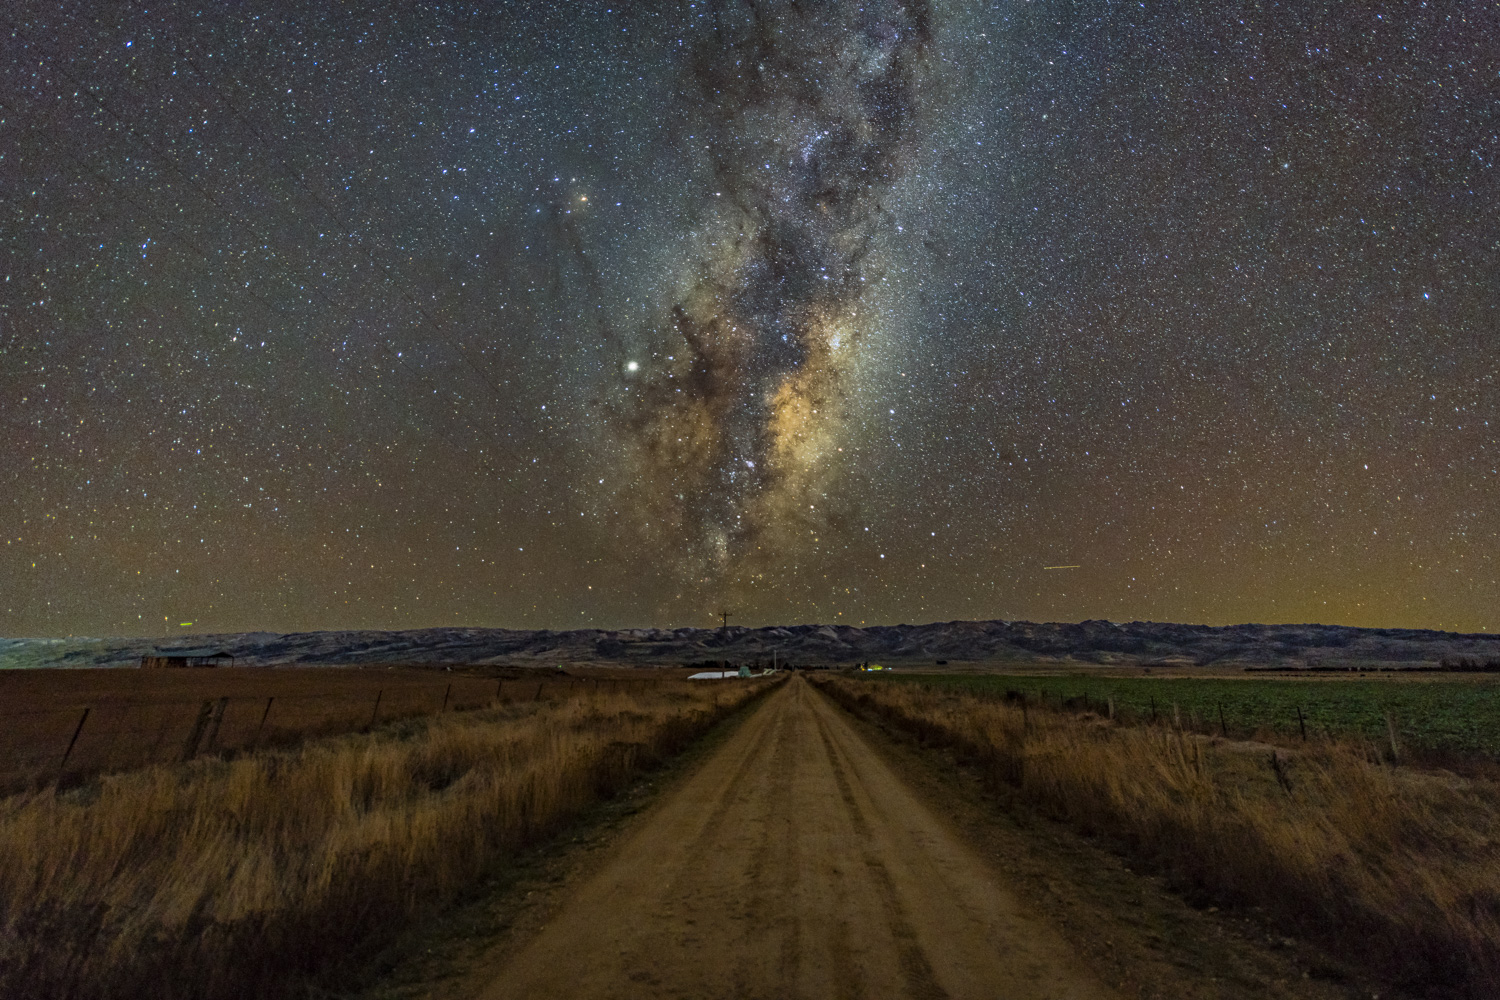 Long straight gravel roads, creased mountain ranges in the distance and the most beautifully crisp and clear night sky. It really doesn’t get much better than the Ida Valley - Authentic As